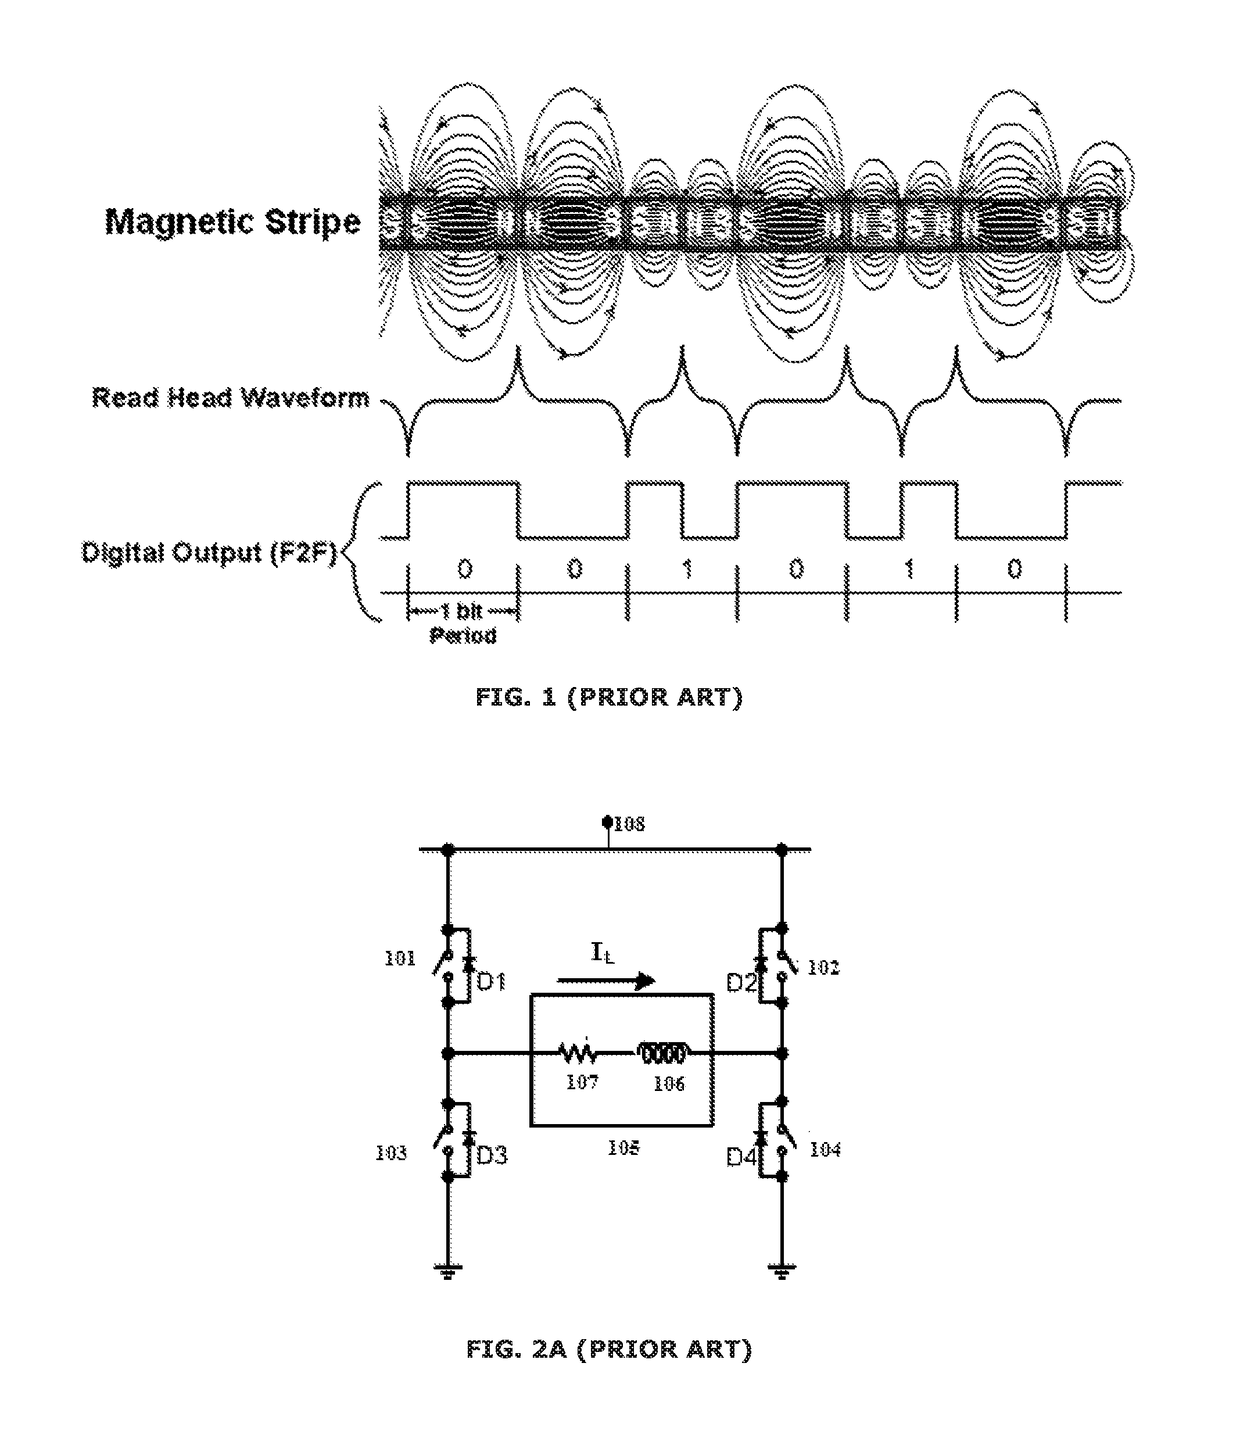 Magnetic stripe data transmission system and method for reliable data transmission and low power consumption